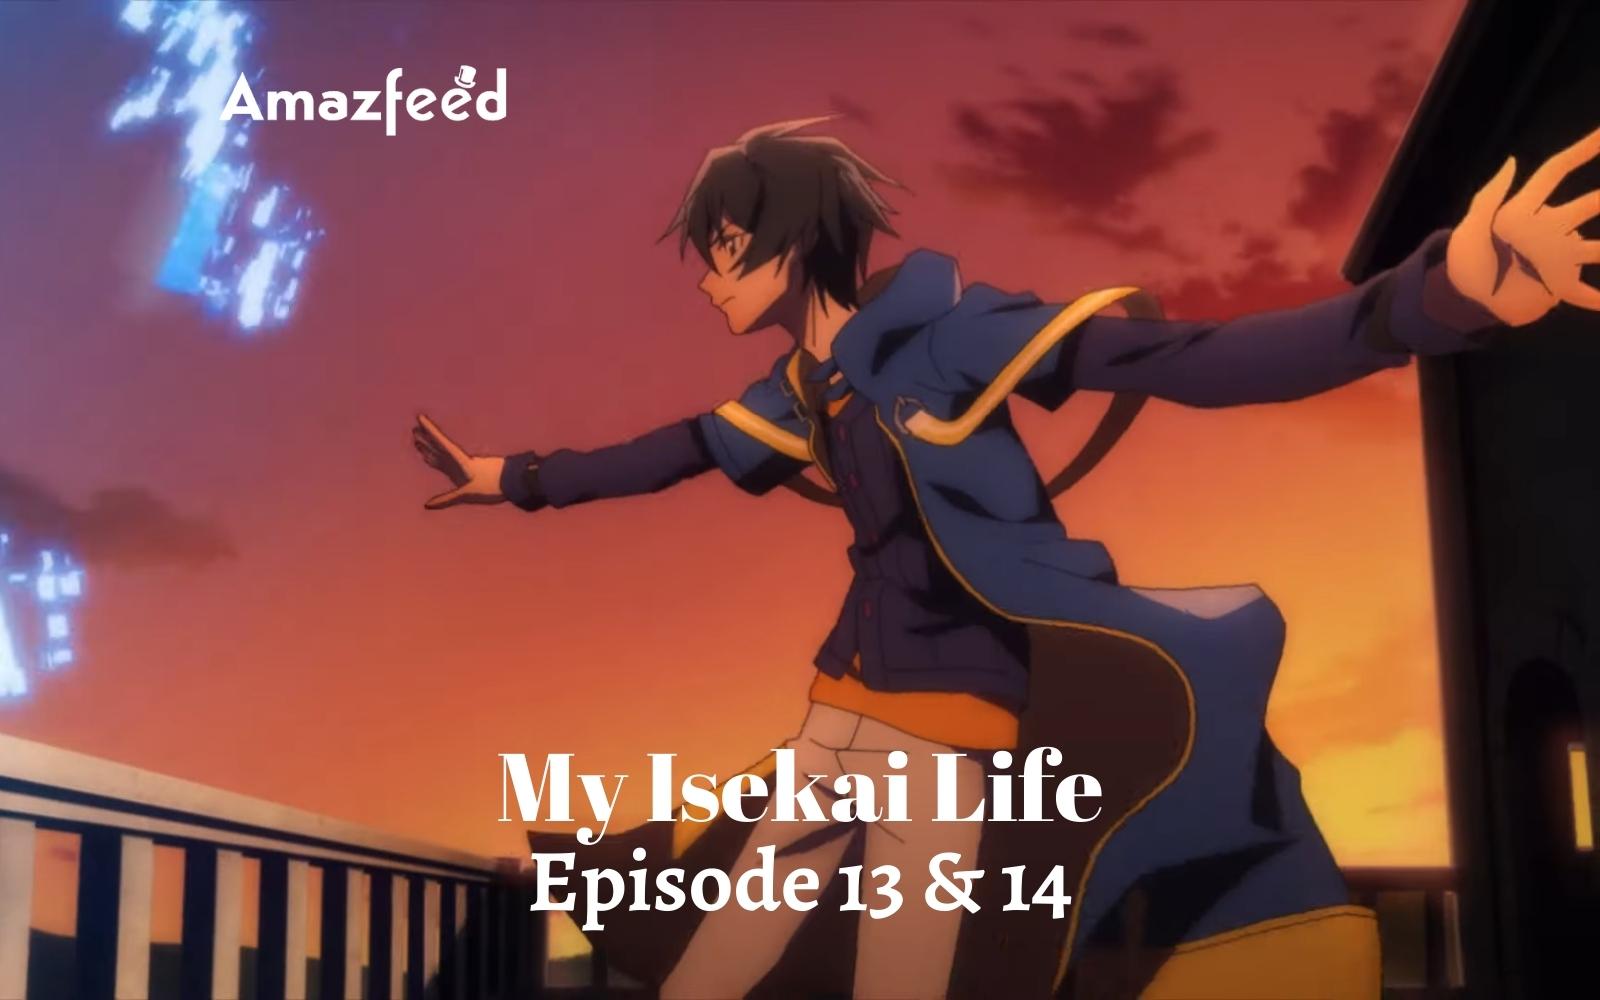 My Isekai Life Episode 13 & 14 : Countdown, Release Date, Spoiler, Premiere Time, Where to Watch, Recap & Cast